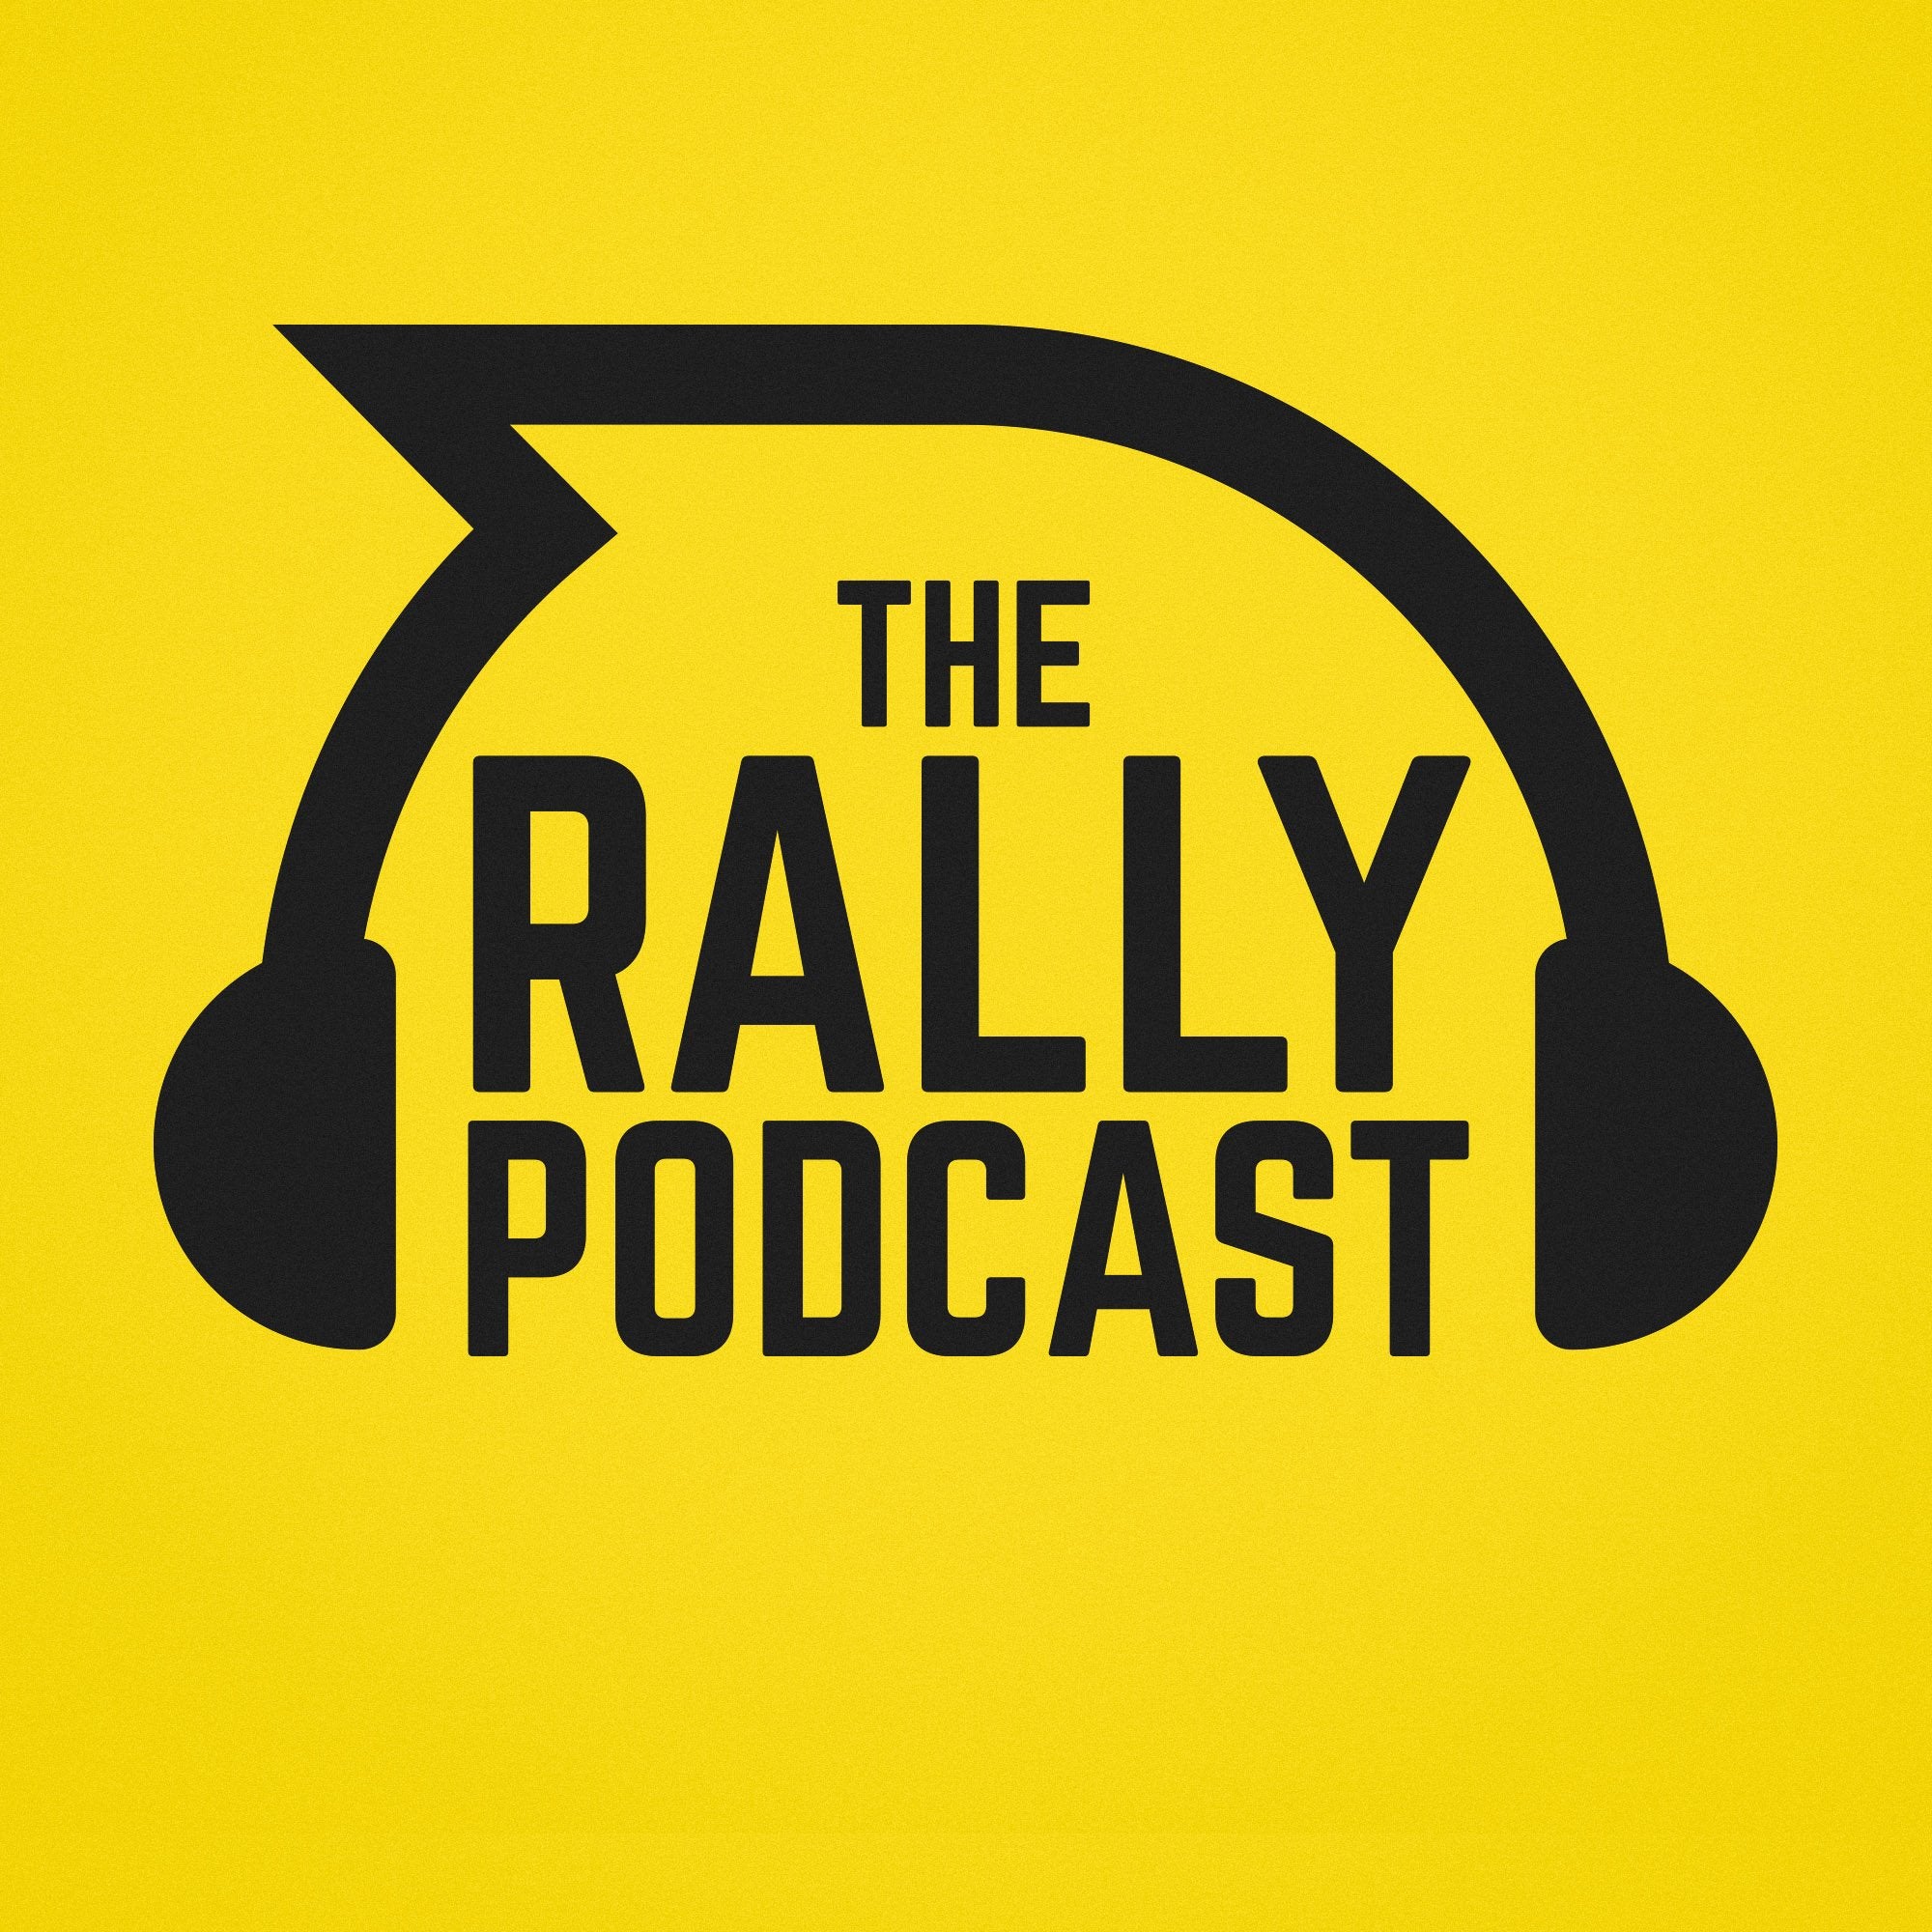 The Rally Podcast - 2018 Season, Episode 8 - An Interview with SRA Event Manager Nora White